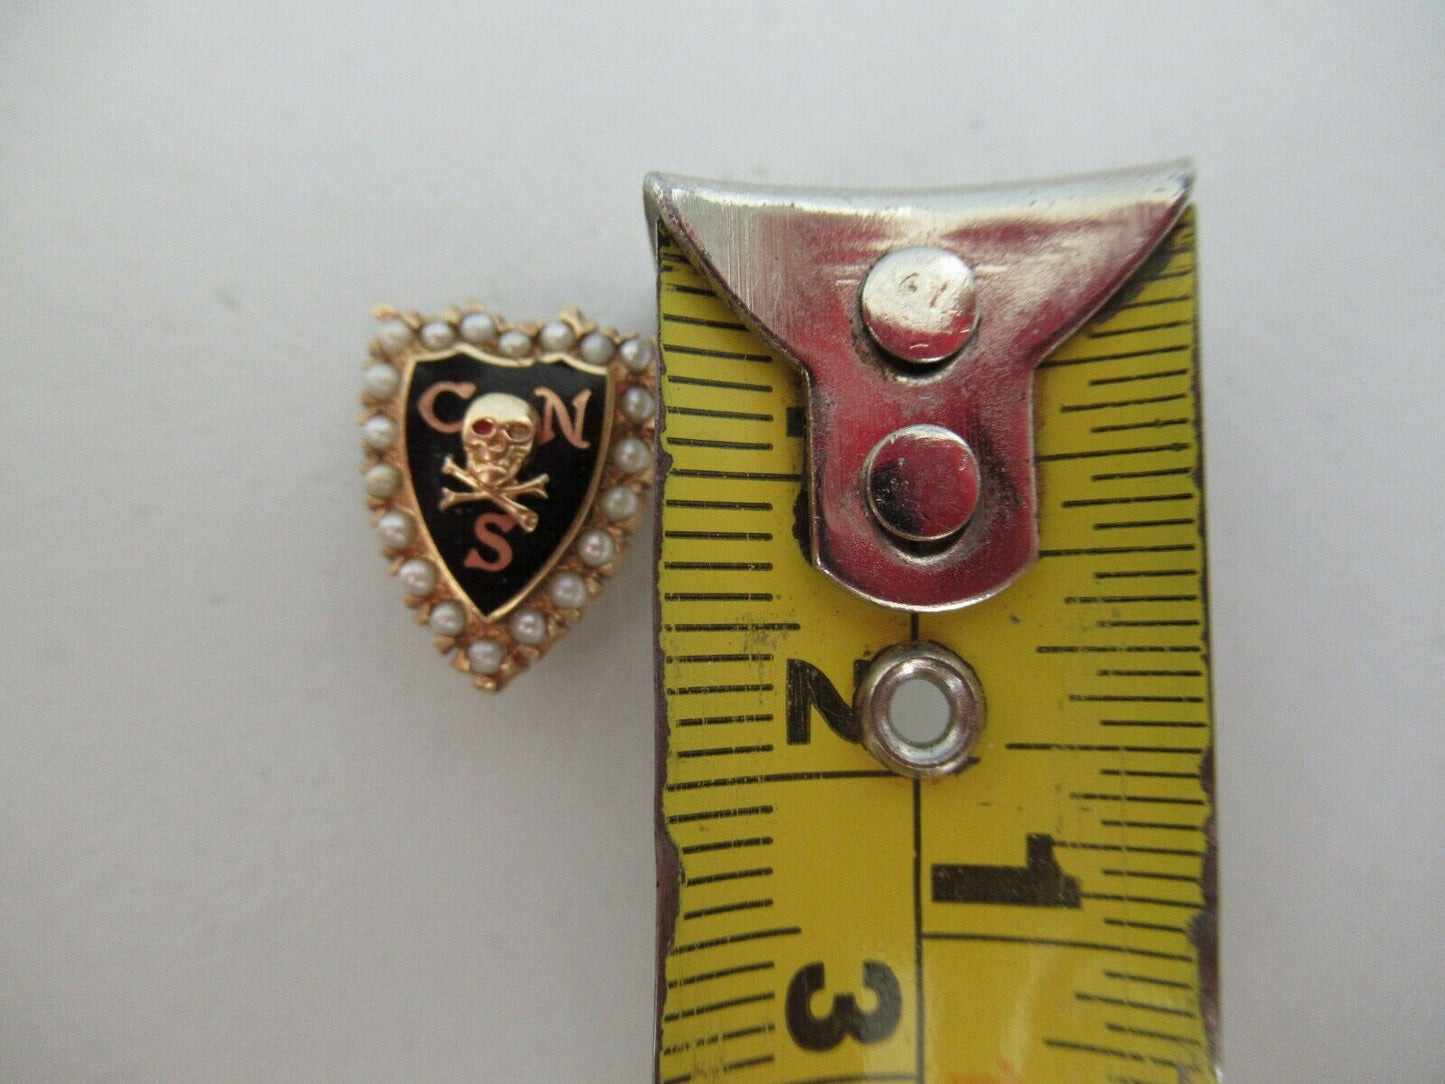 USA FRATERNITY SWEETHEART PIN CNS. MADE IN GOLD 14K. NAMED. MARKED. 16